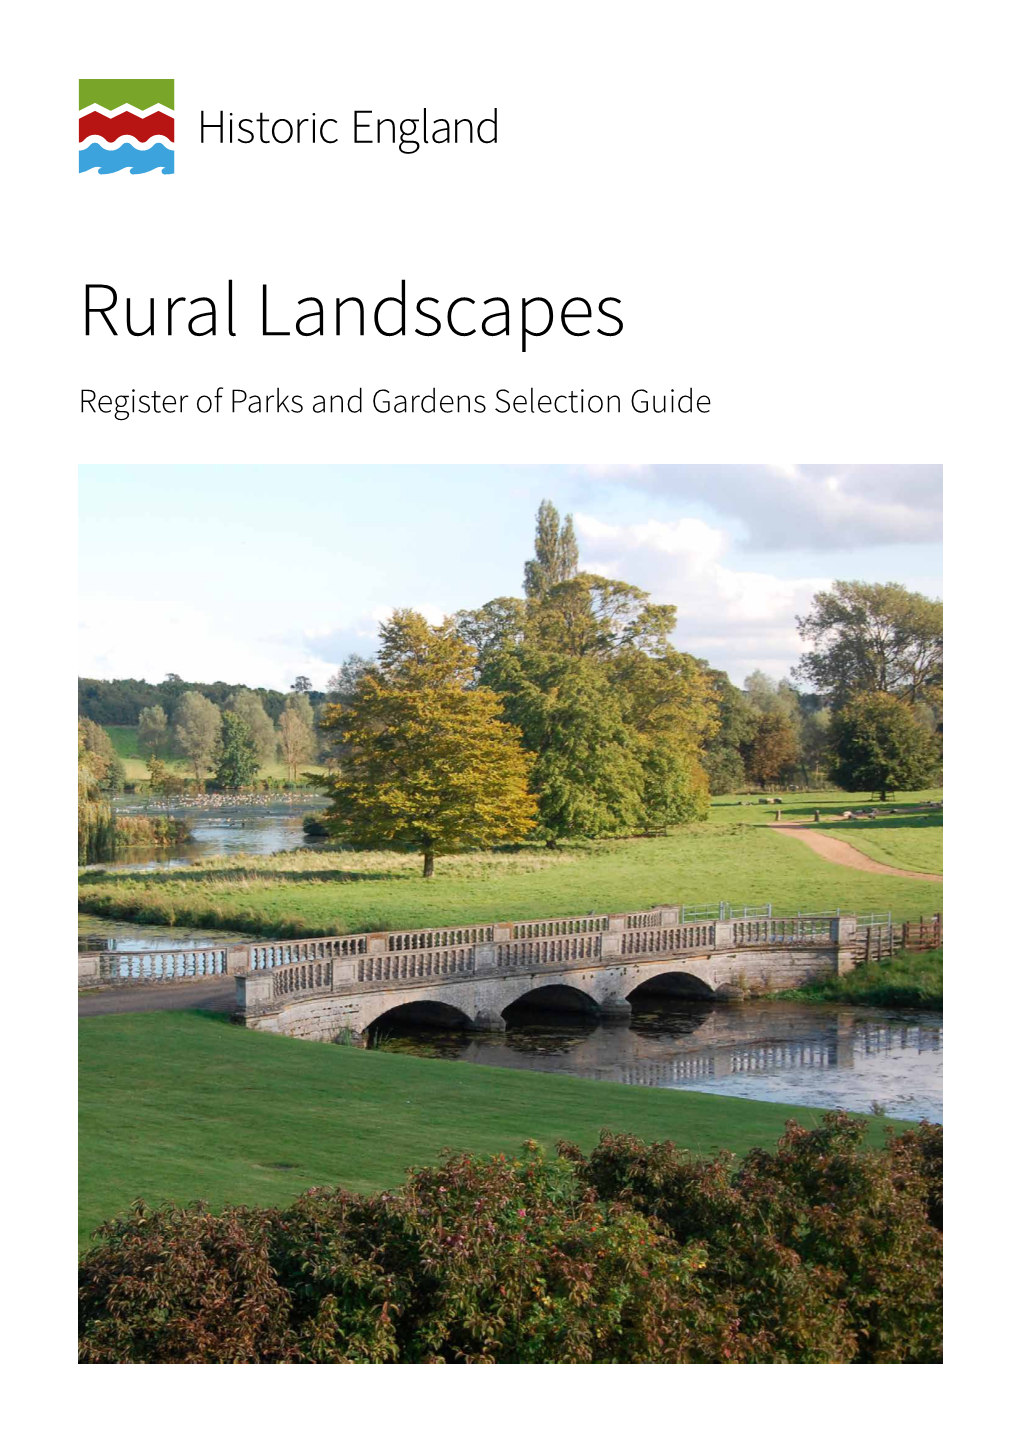 Rural Landscapes Register of Parks and Gardens Selection Guide Summary